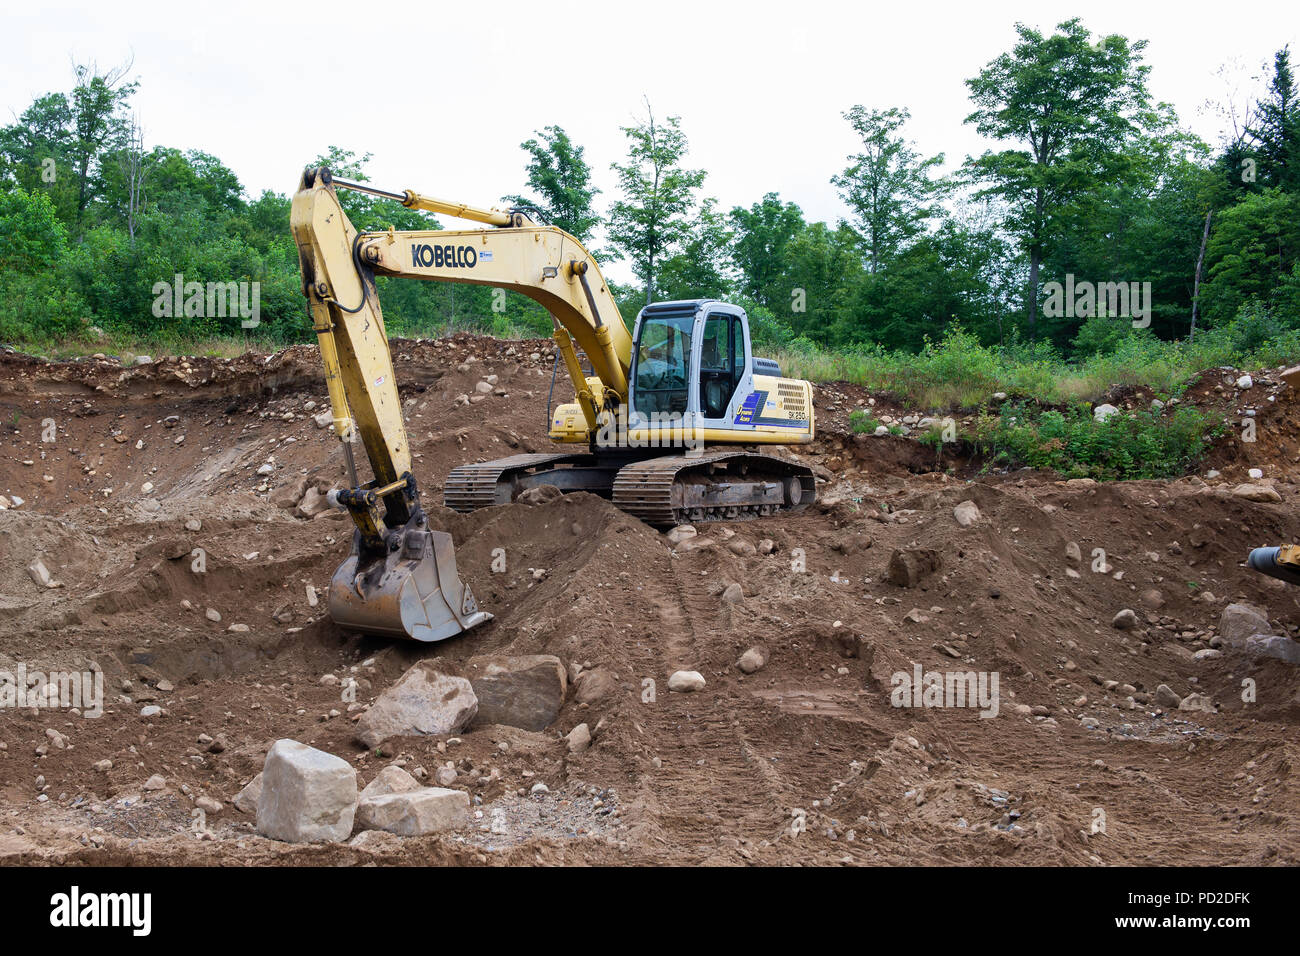 A Kobelco SK 250lc Hydraulic Excavator parked in a sand and gravel pit in the Adirondack Mountains, NY USA Stock Photo